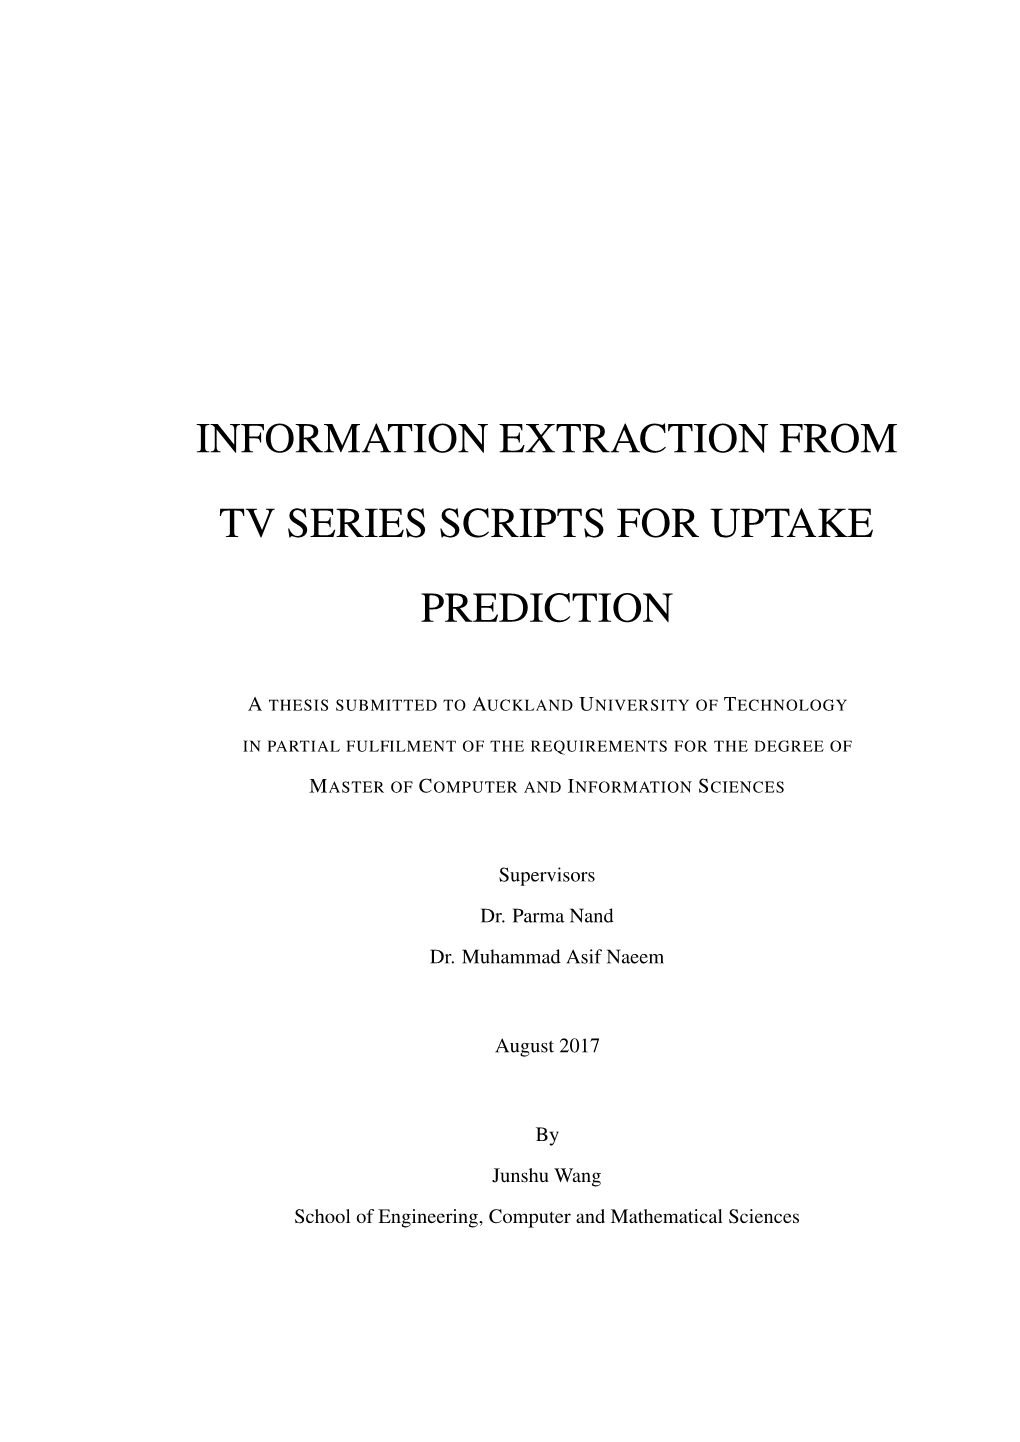 Information Extraction from Tv Series Scripts for Uptake Prediction